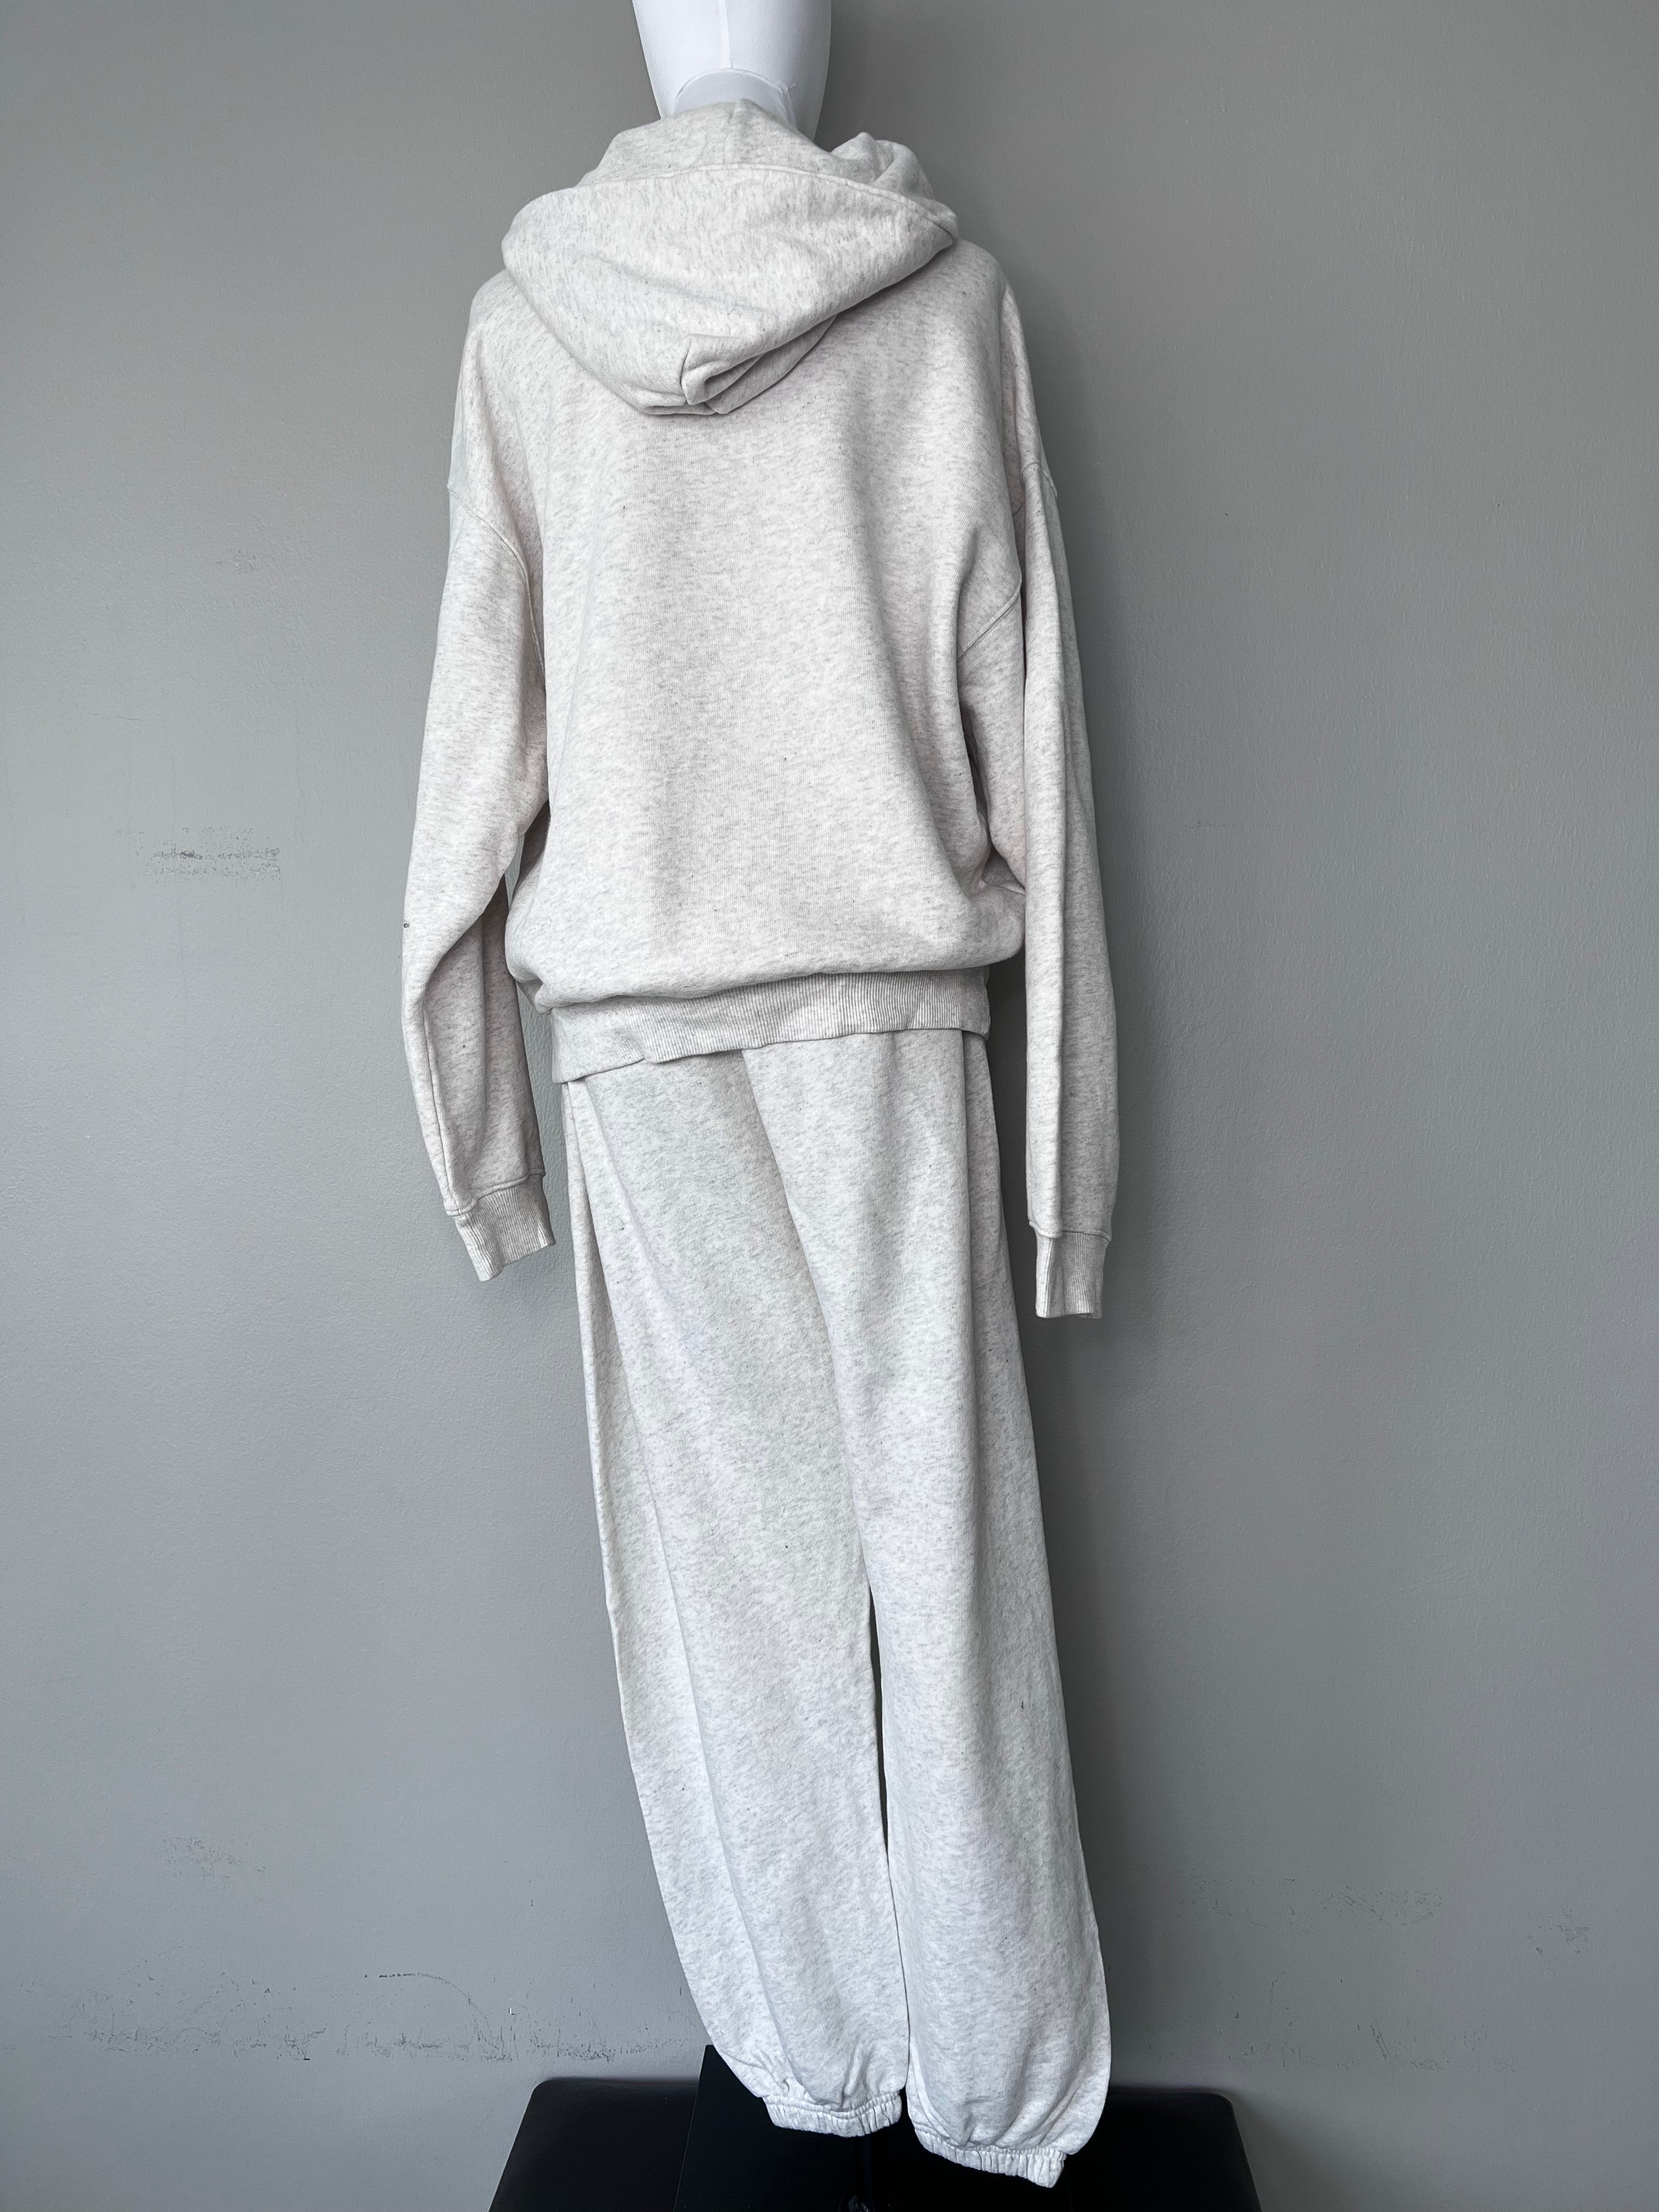 Grey sweatsuit. Hoodie with logo in the middle and matching sweatpants. - REEBOK